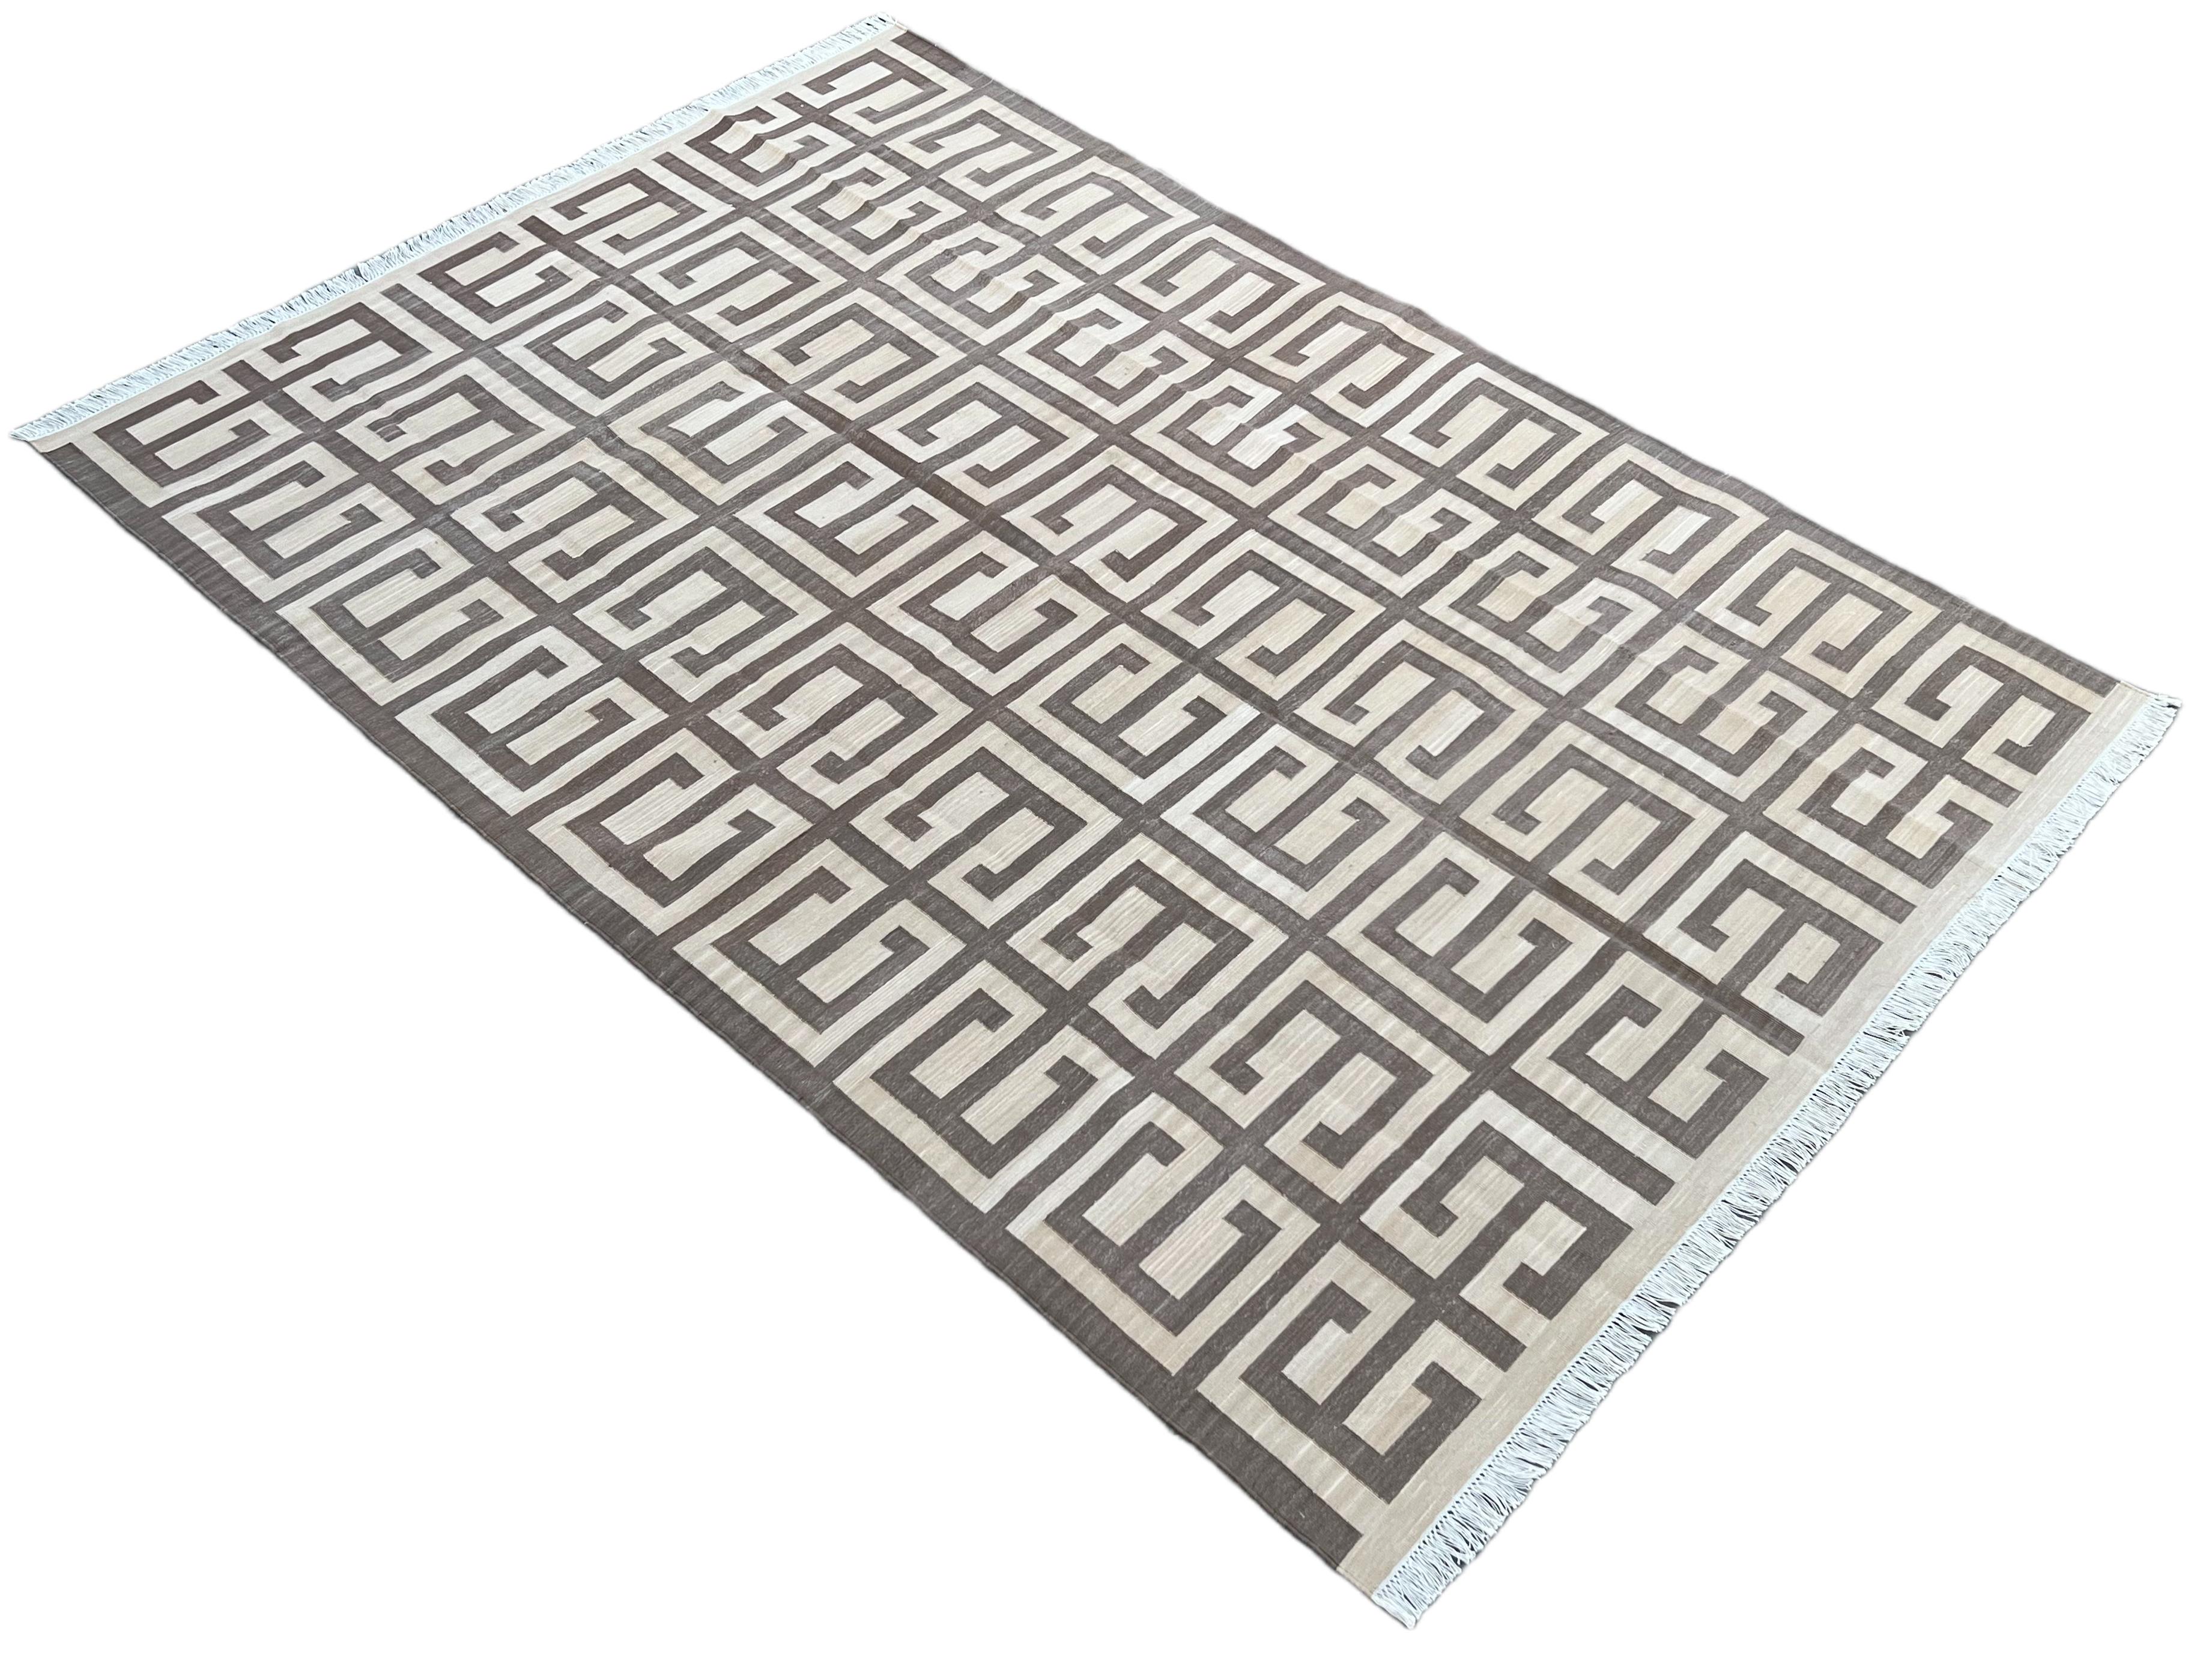 Cotton Vegetable Dyed Reversible Beige & Brown Geometric Patterned Indian Rug - 6'x9'
These special flat-weave dhurries are hand-woven with 15 ply 100% cotton yarn. Due to the special manufacturing techniques used to create our rugs, the size and